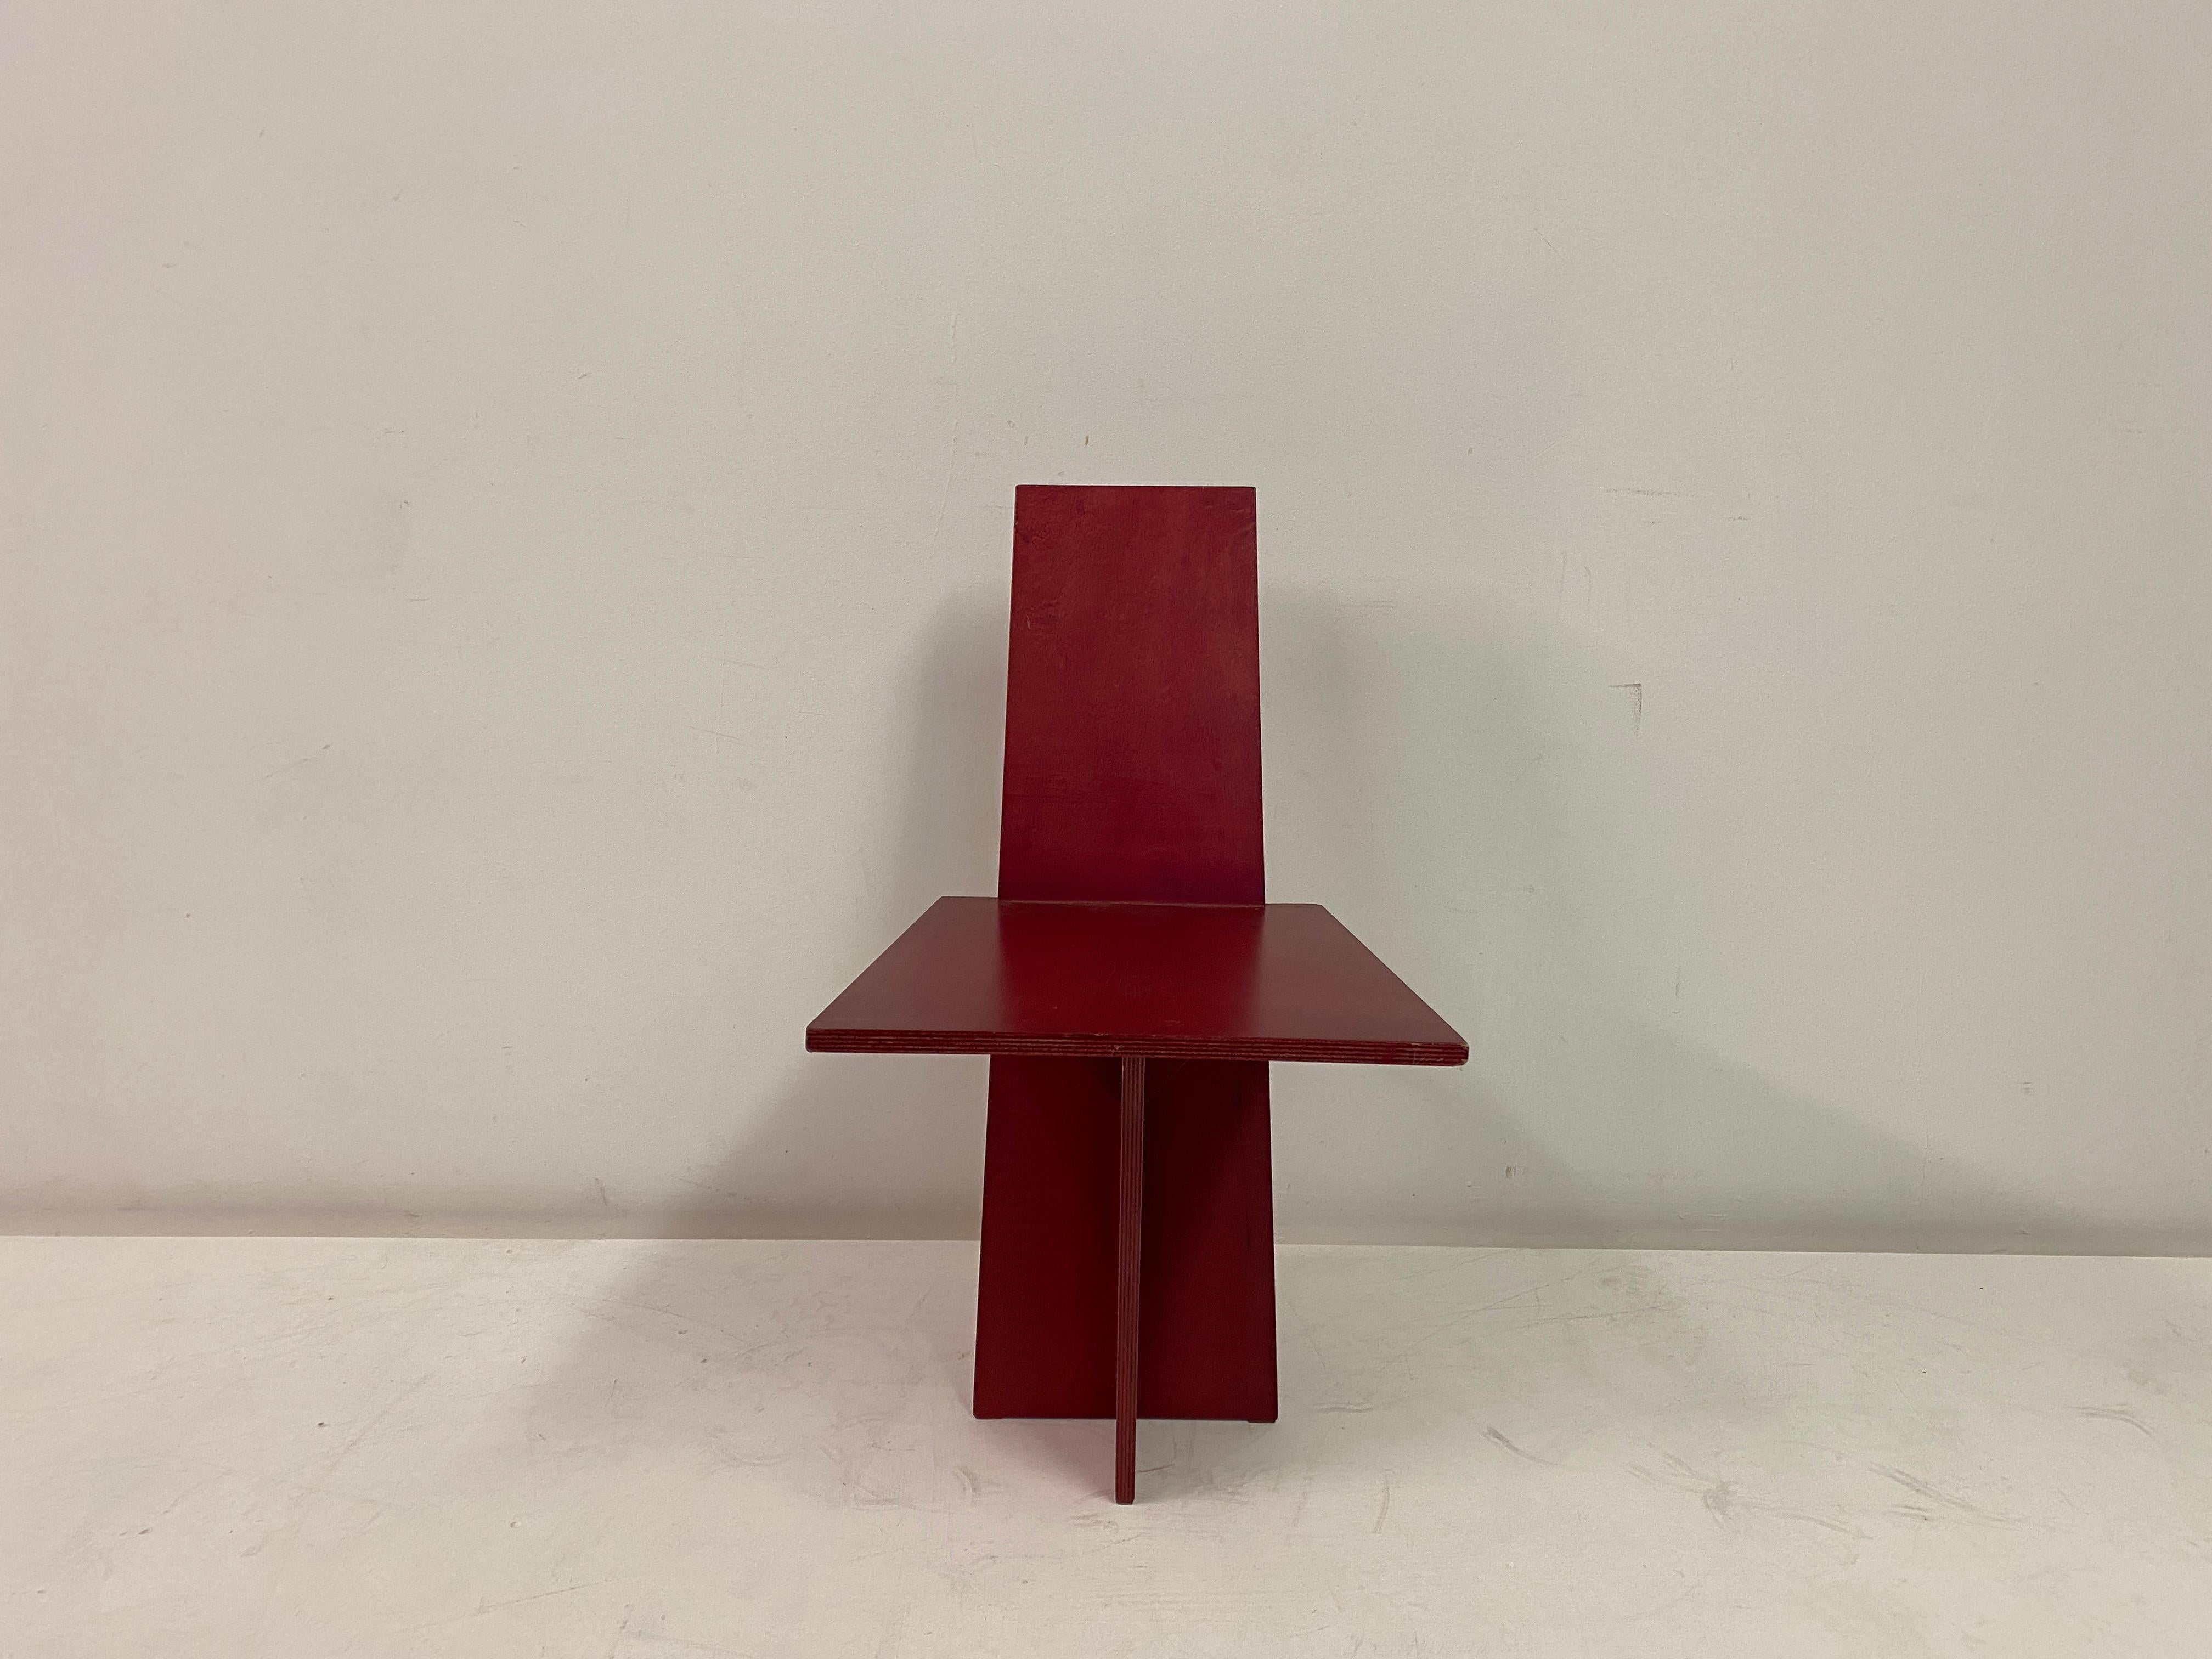 Italian 1980s Red Modernist Plywood Chair For Sale